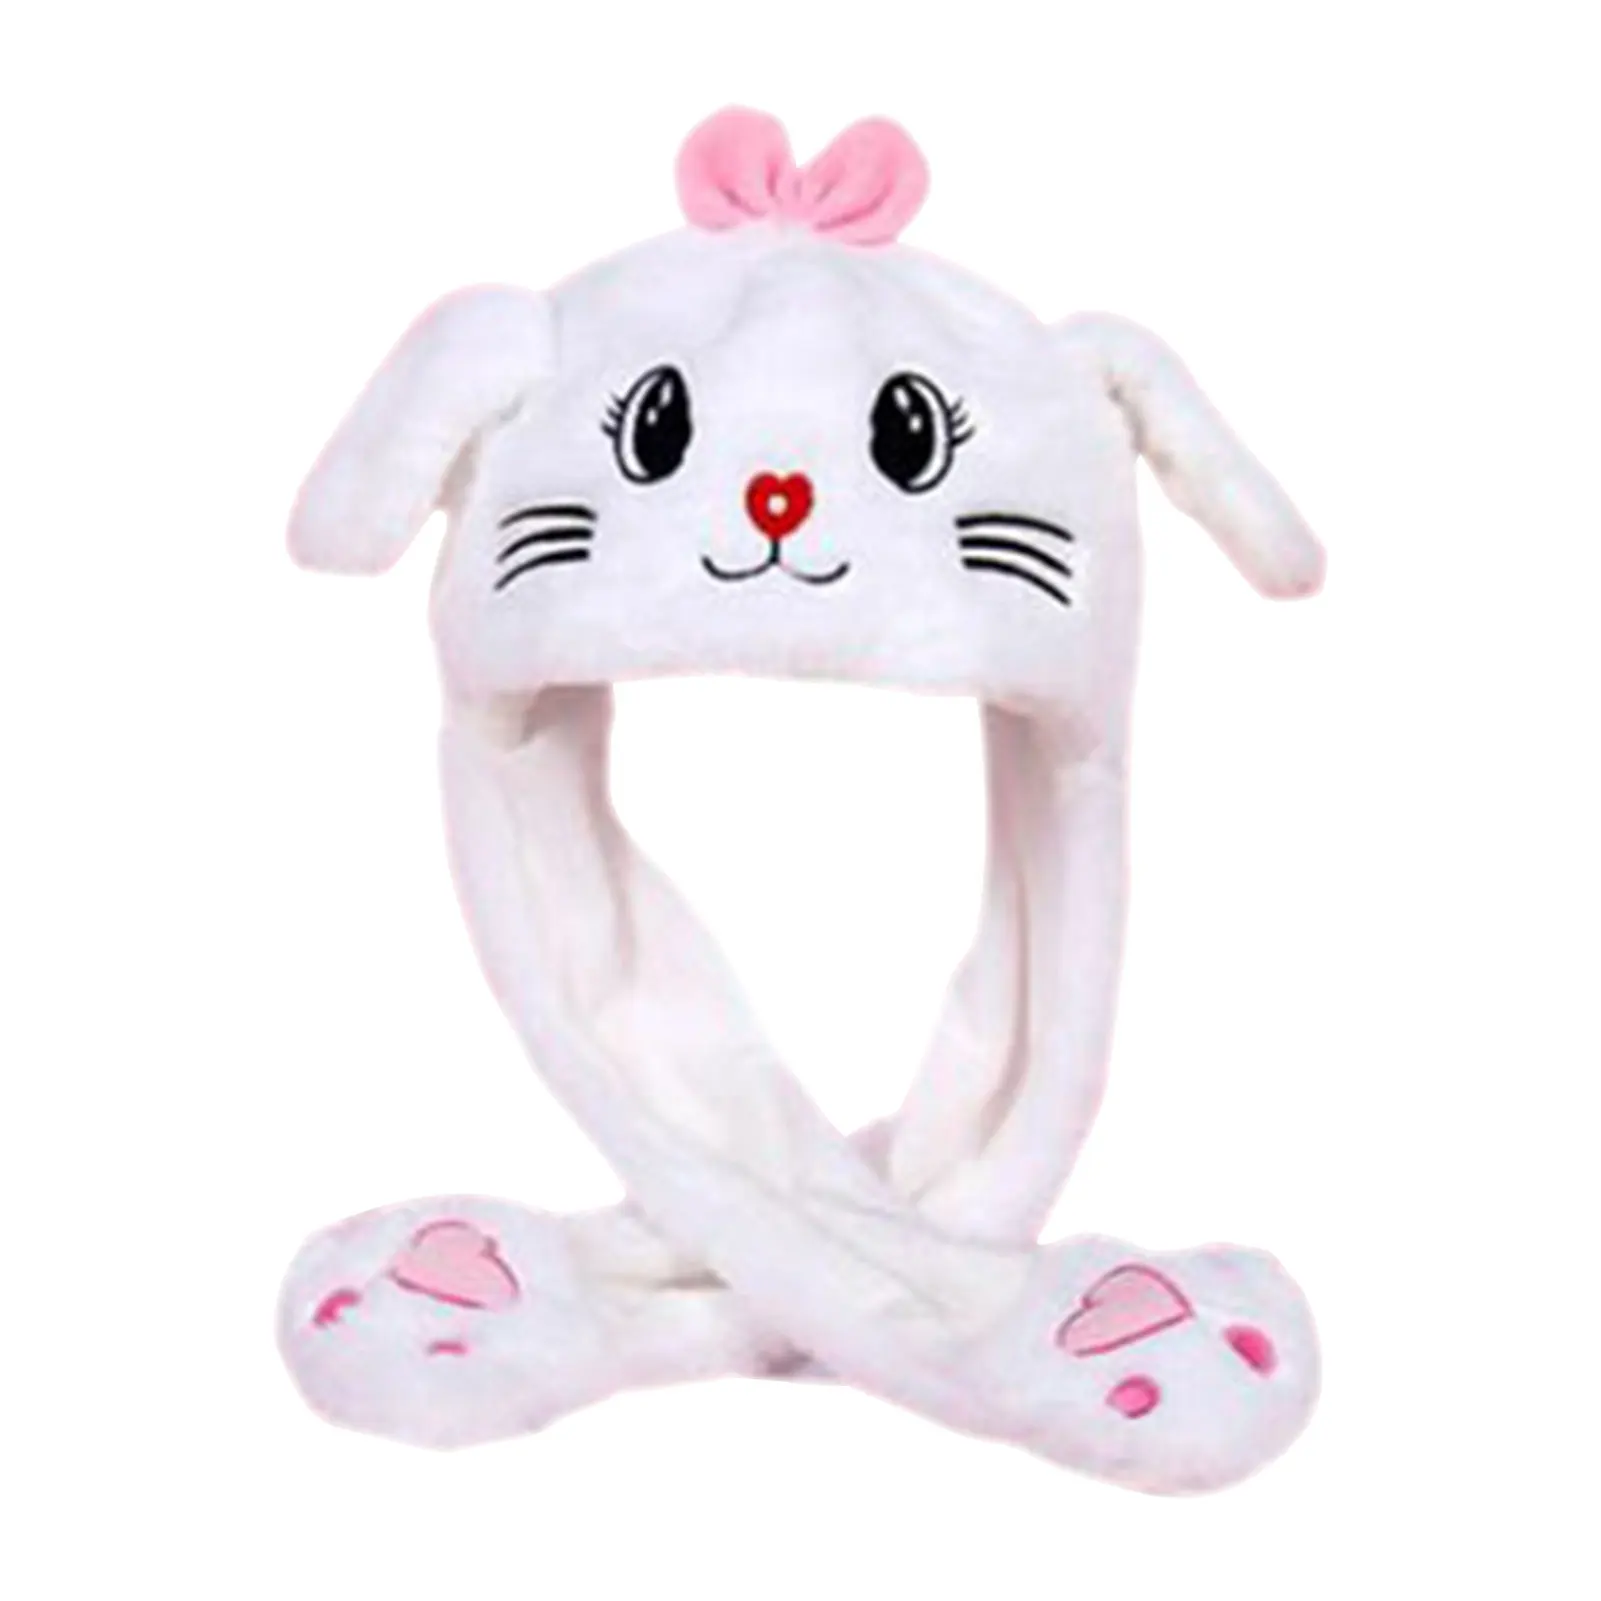 3 in1 gloves scarf rabbit hat long ears cute cartoon hat kawaii funny birthday gift bunny plush cap winter pink Lovely Moving Bunny Ears Hat Plush Rabbit Hat Funny Play Toy Up Down Moving Bunny Ears Toy Hat Girlfriend Children Girls Gifts